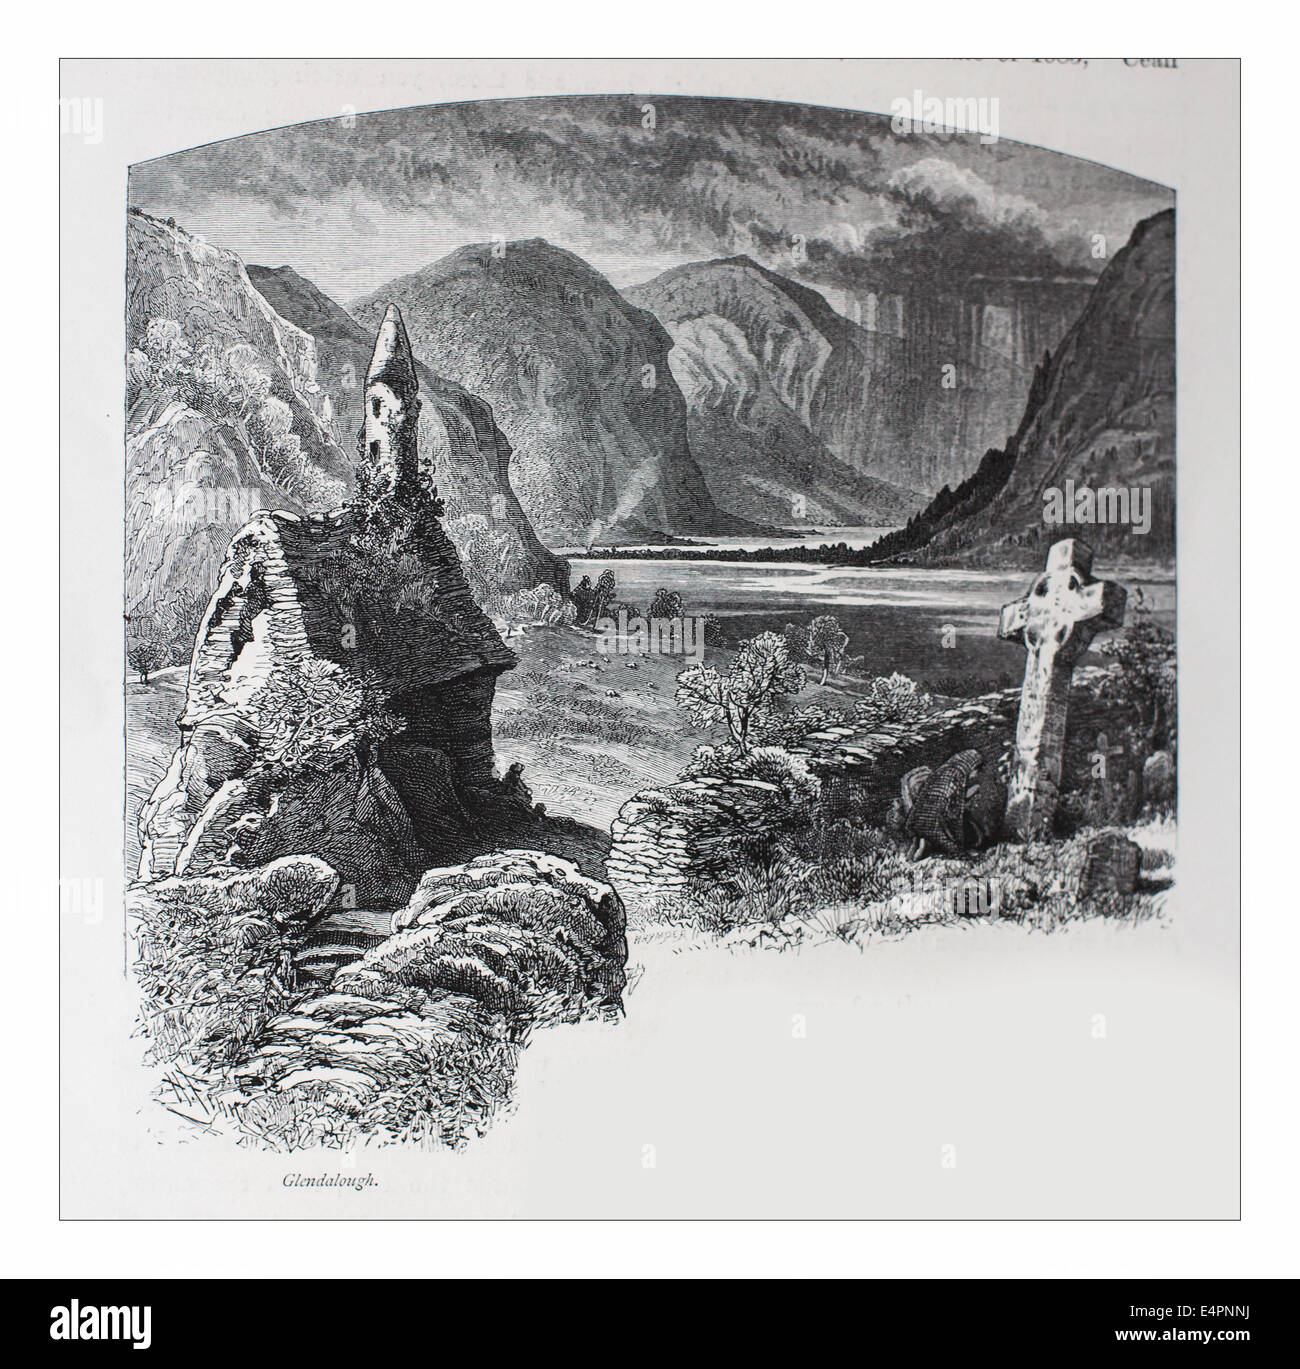 Gandalough, Wicklow Mountains National Park  Illustration from 'The British isles - Cassell Petter & Galpin Part 8 Picturesque Europe. Picturesque Europe was an illustrated set of Magazines published by Cassell, Petter, Galpin & Co. of London, Paris and New York in 1877. The publications depicted tourist haunts in Europe, with text descriptions and steel and wood engravings by eminent artists of the time, such as Harry Fenn, William H J Boot, Thomas C. L. Rowbotham, Henry T. Green , Myles B. Foster, John Mogford , David H. McKewan, William L. Leitch, Edmund M. Wimperis and Joseph B. Smith. Stock Photo